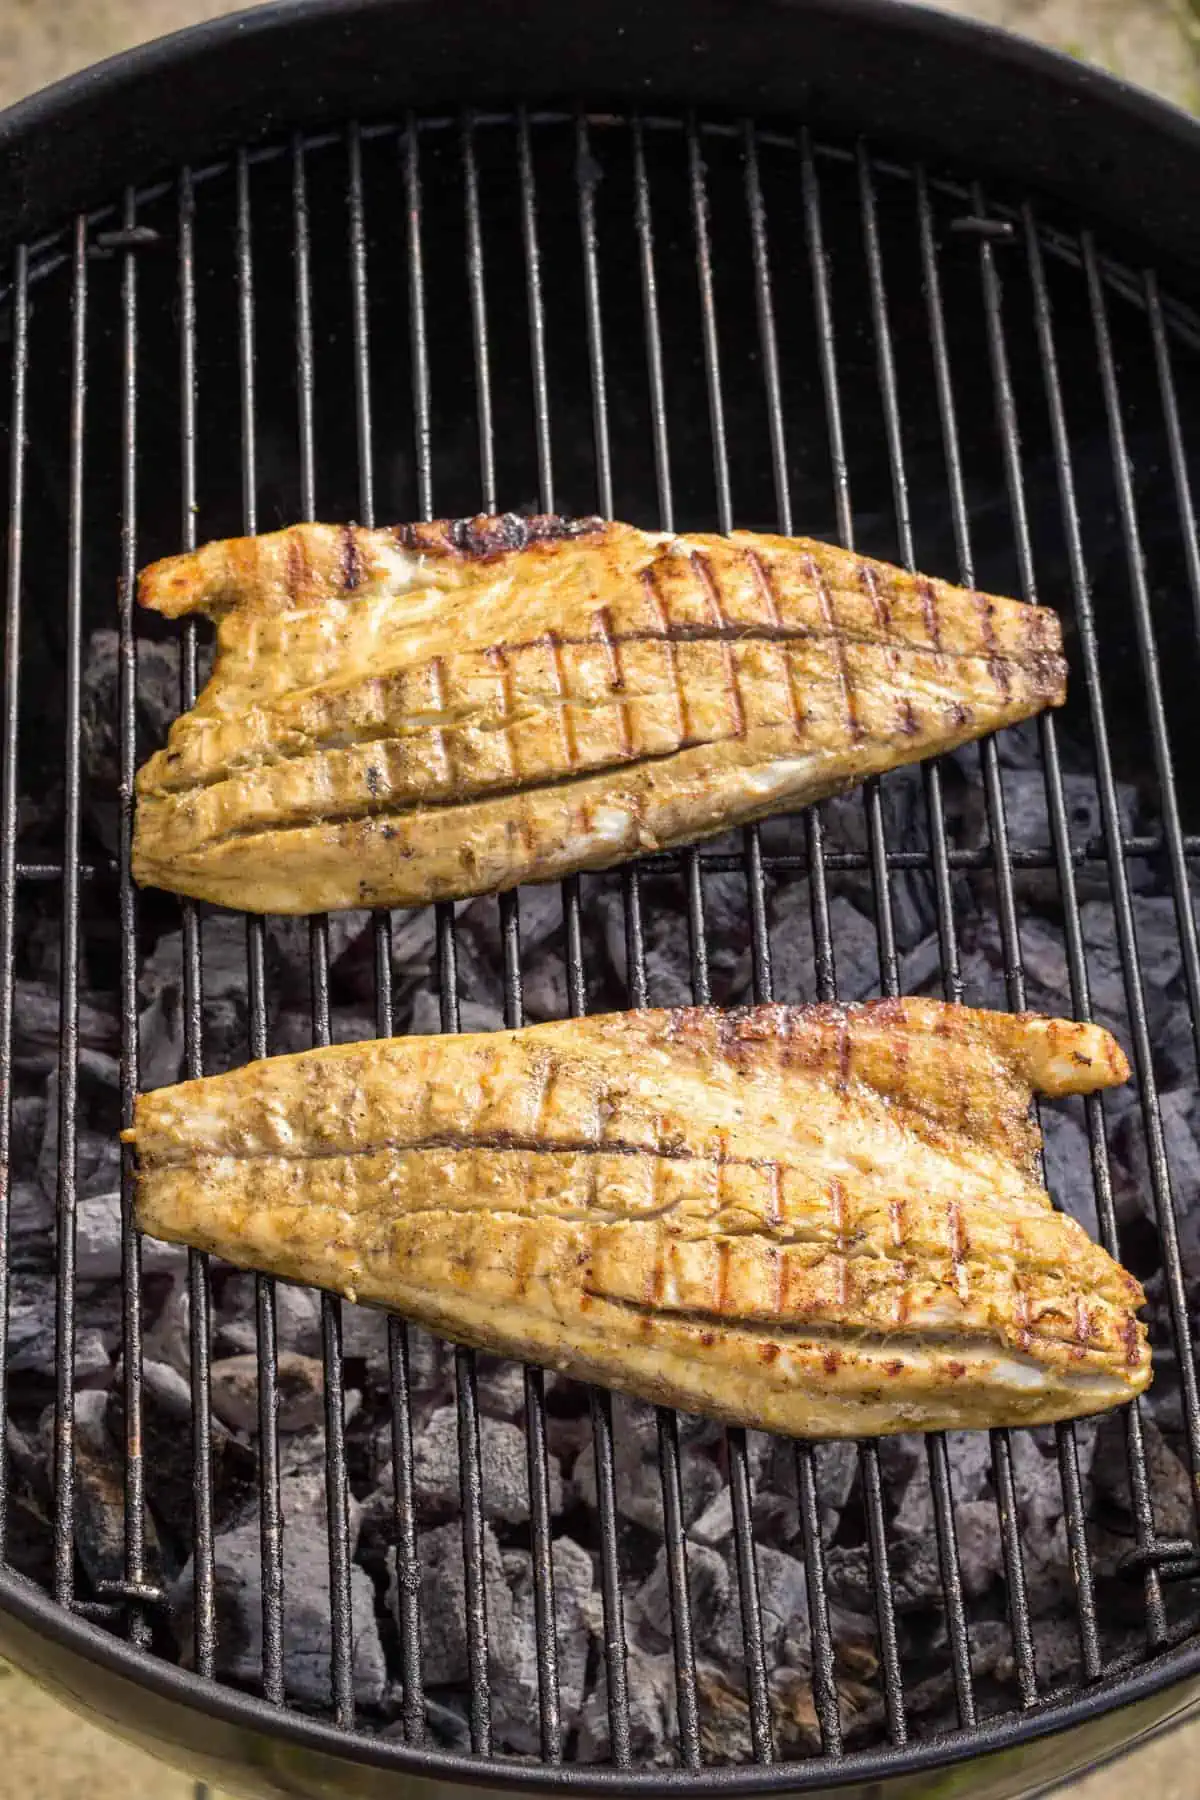 Two barramundi fillets on a charcoal grill.